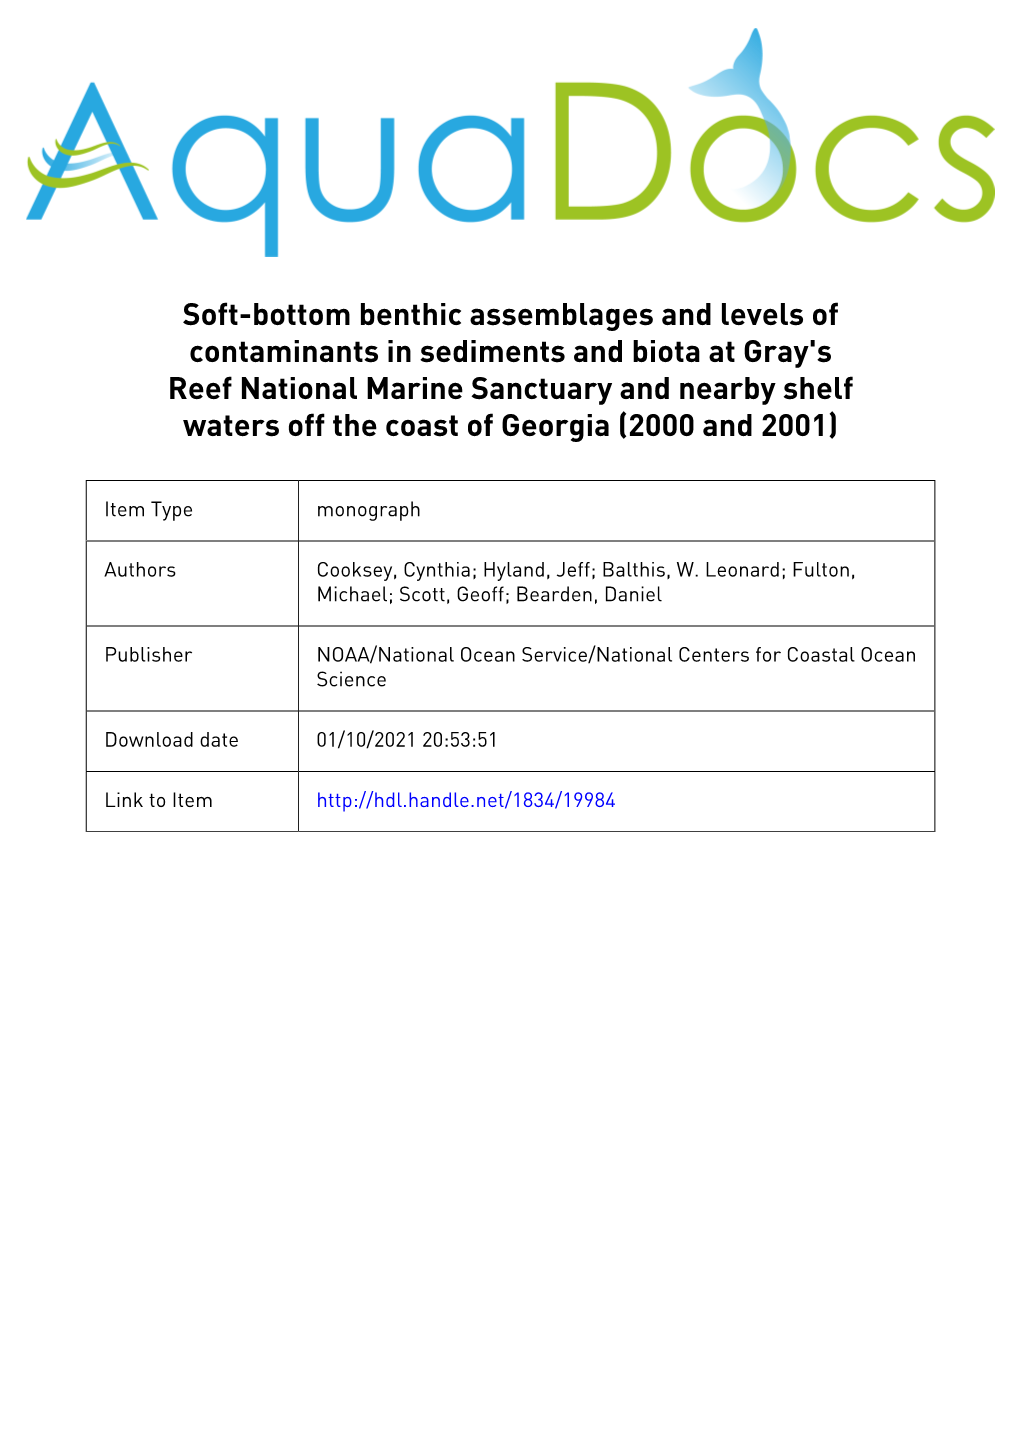 Soft-Bottom Benthic Assemblages and Levels of Contaminants in Sediments and Biota at Gray's Reef National Marine Sanctuary and N